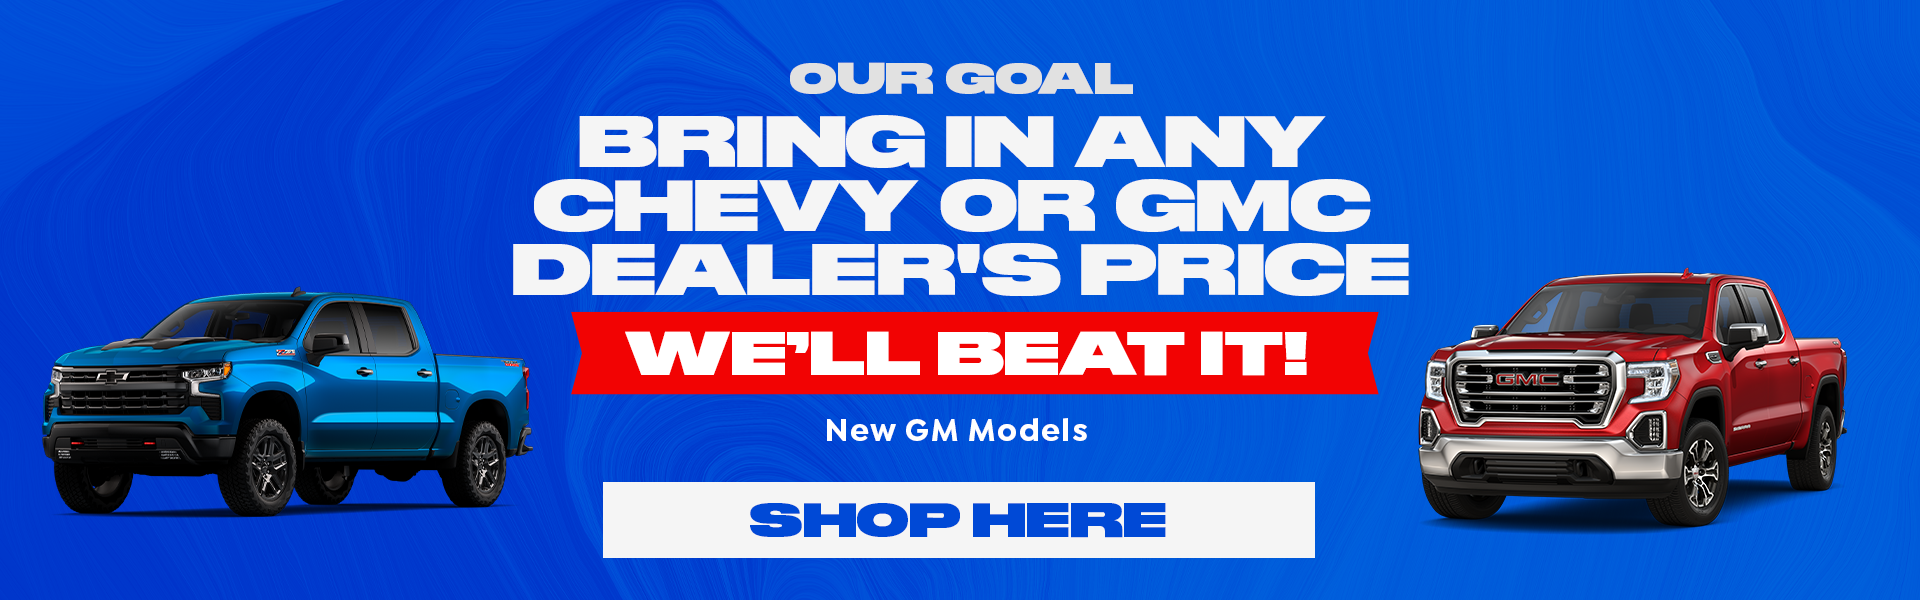 Bring in any Chevy, GMC, Buick Dealer's Price